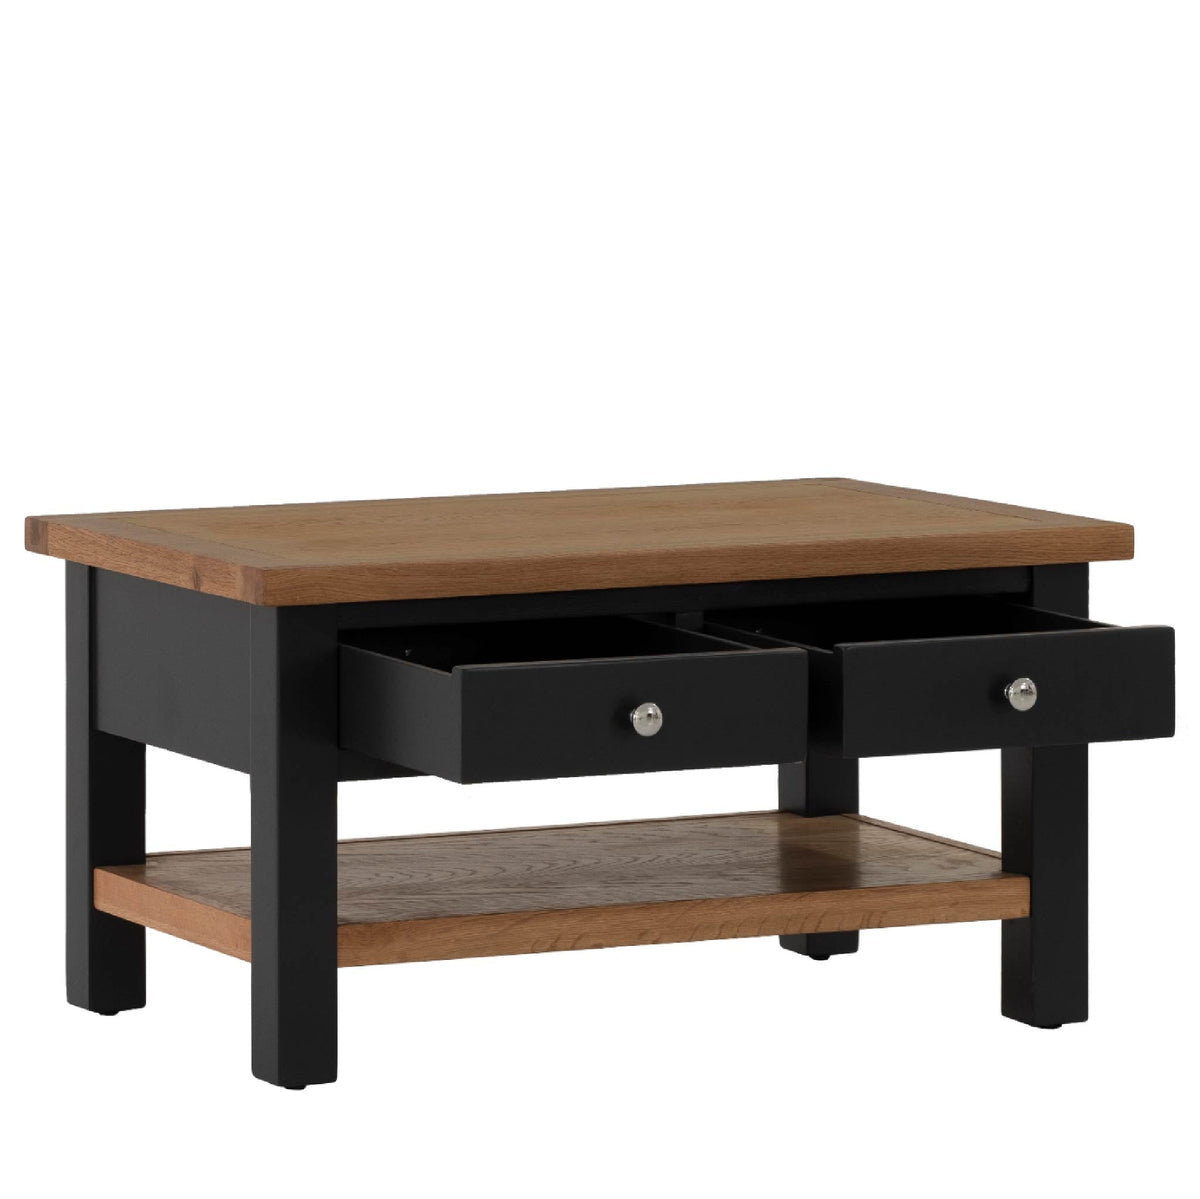 Charlestown Black Coffee Table - With Drawers Open